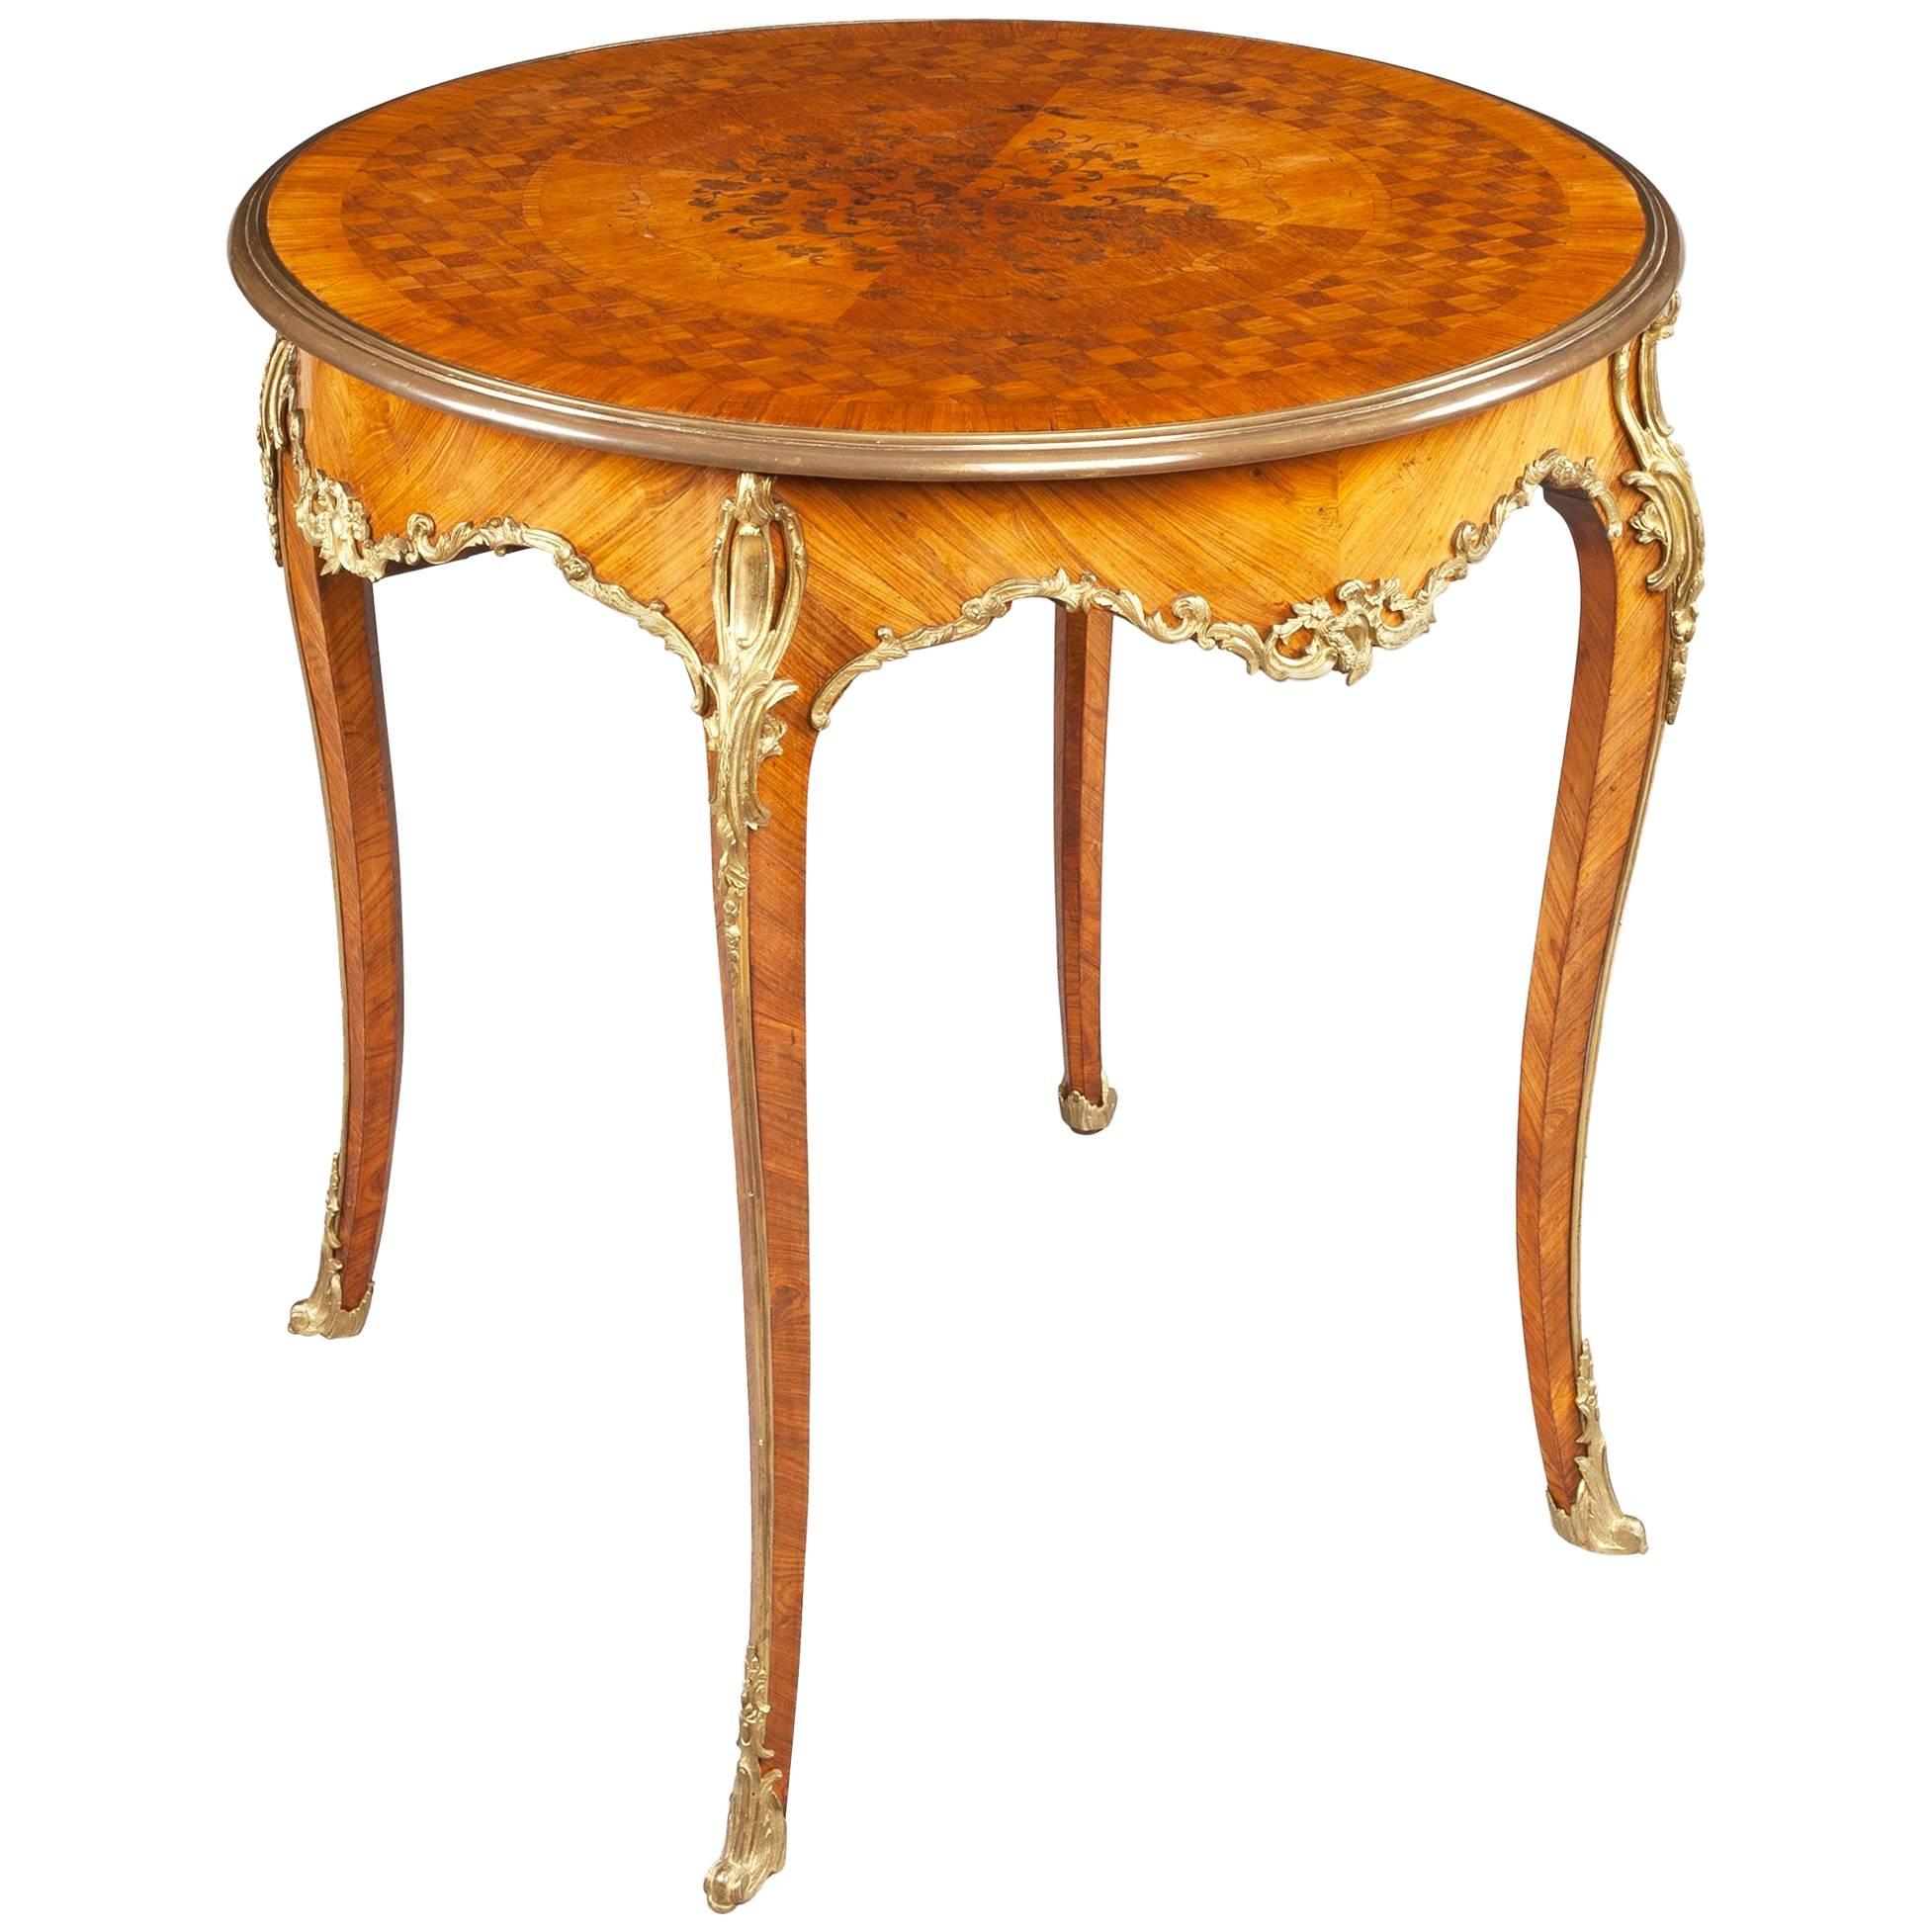 French Kingwood and Gilt Bronze Parquetry Round Side Table, 19th Century For Sale